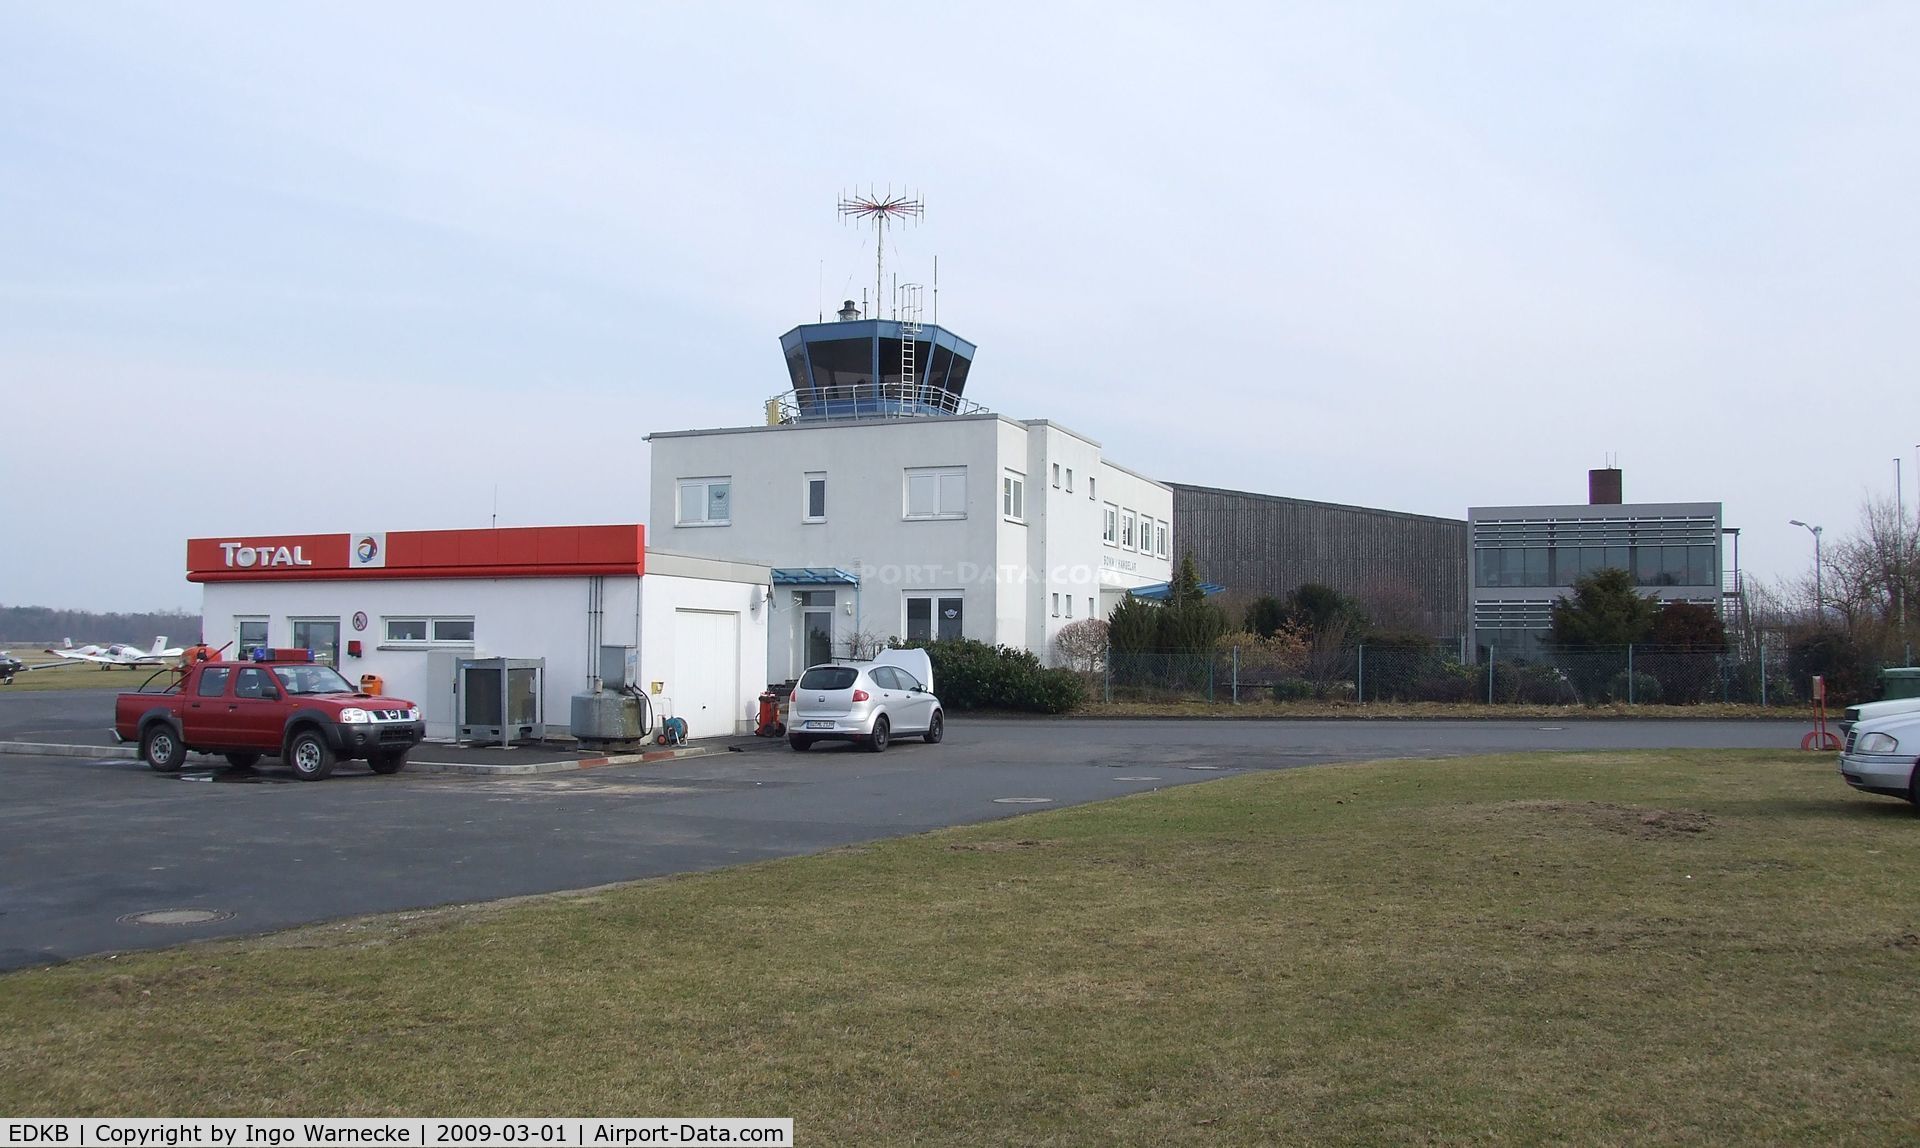 Bonn-Hangelar Airport, Sankt Augustin Germany (EDKB) - tower and airfield fuelling station